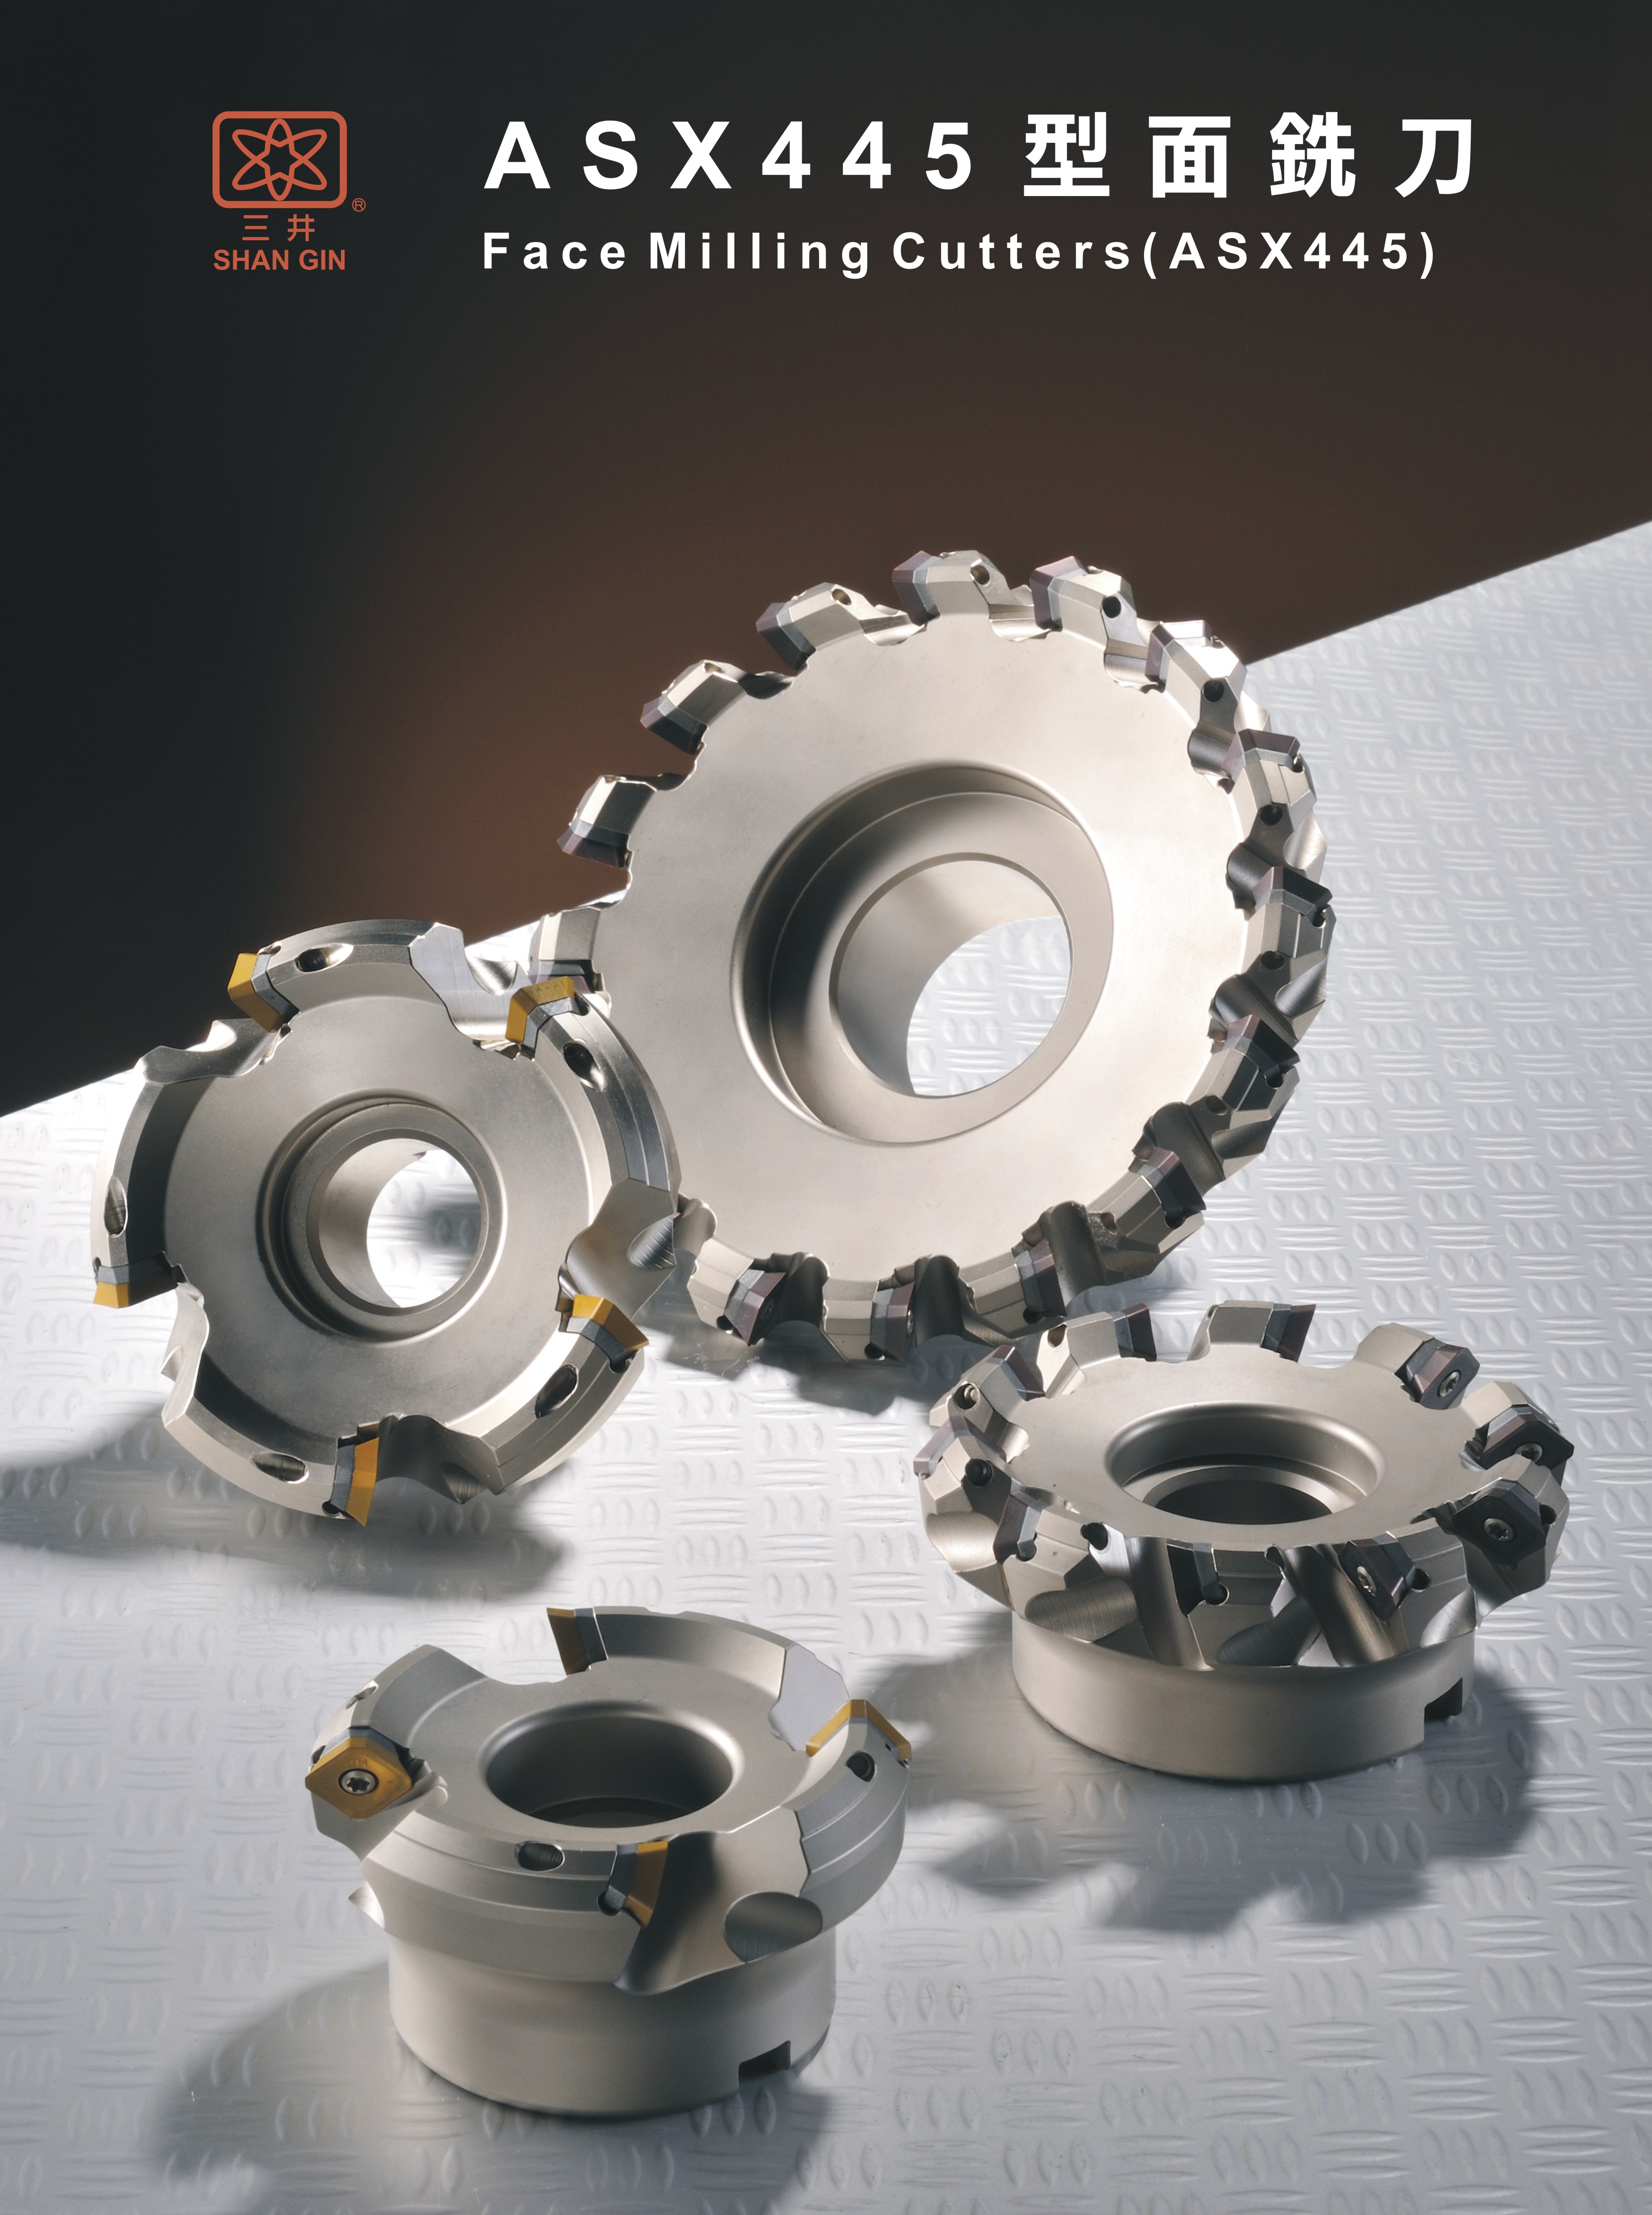 Products|Face Milling Cutters (ASX445)